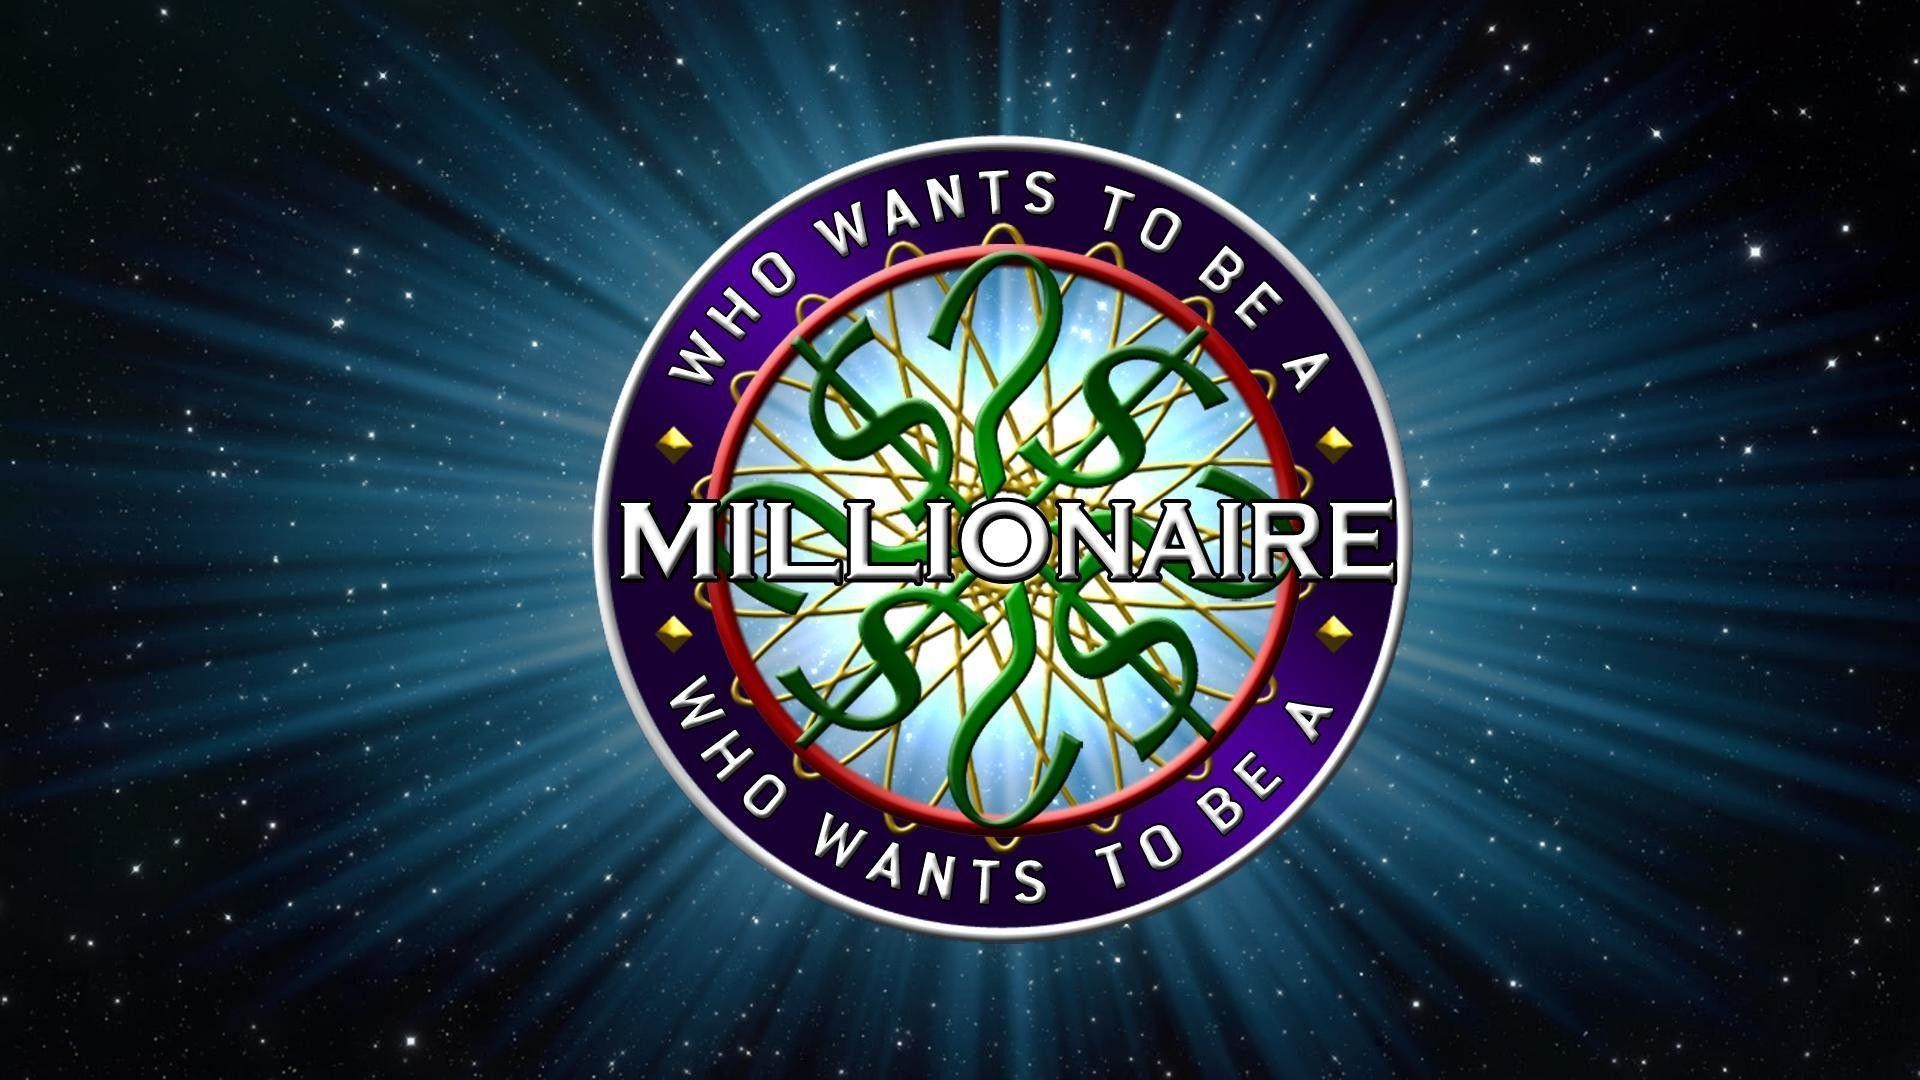 1920x1080 1 Who Wants to be a Millionaire HD Wallpapers | Backgrounds .